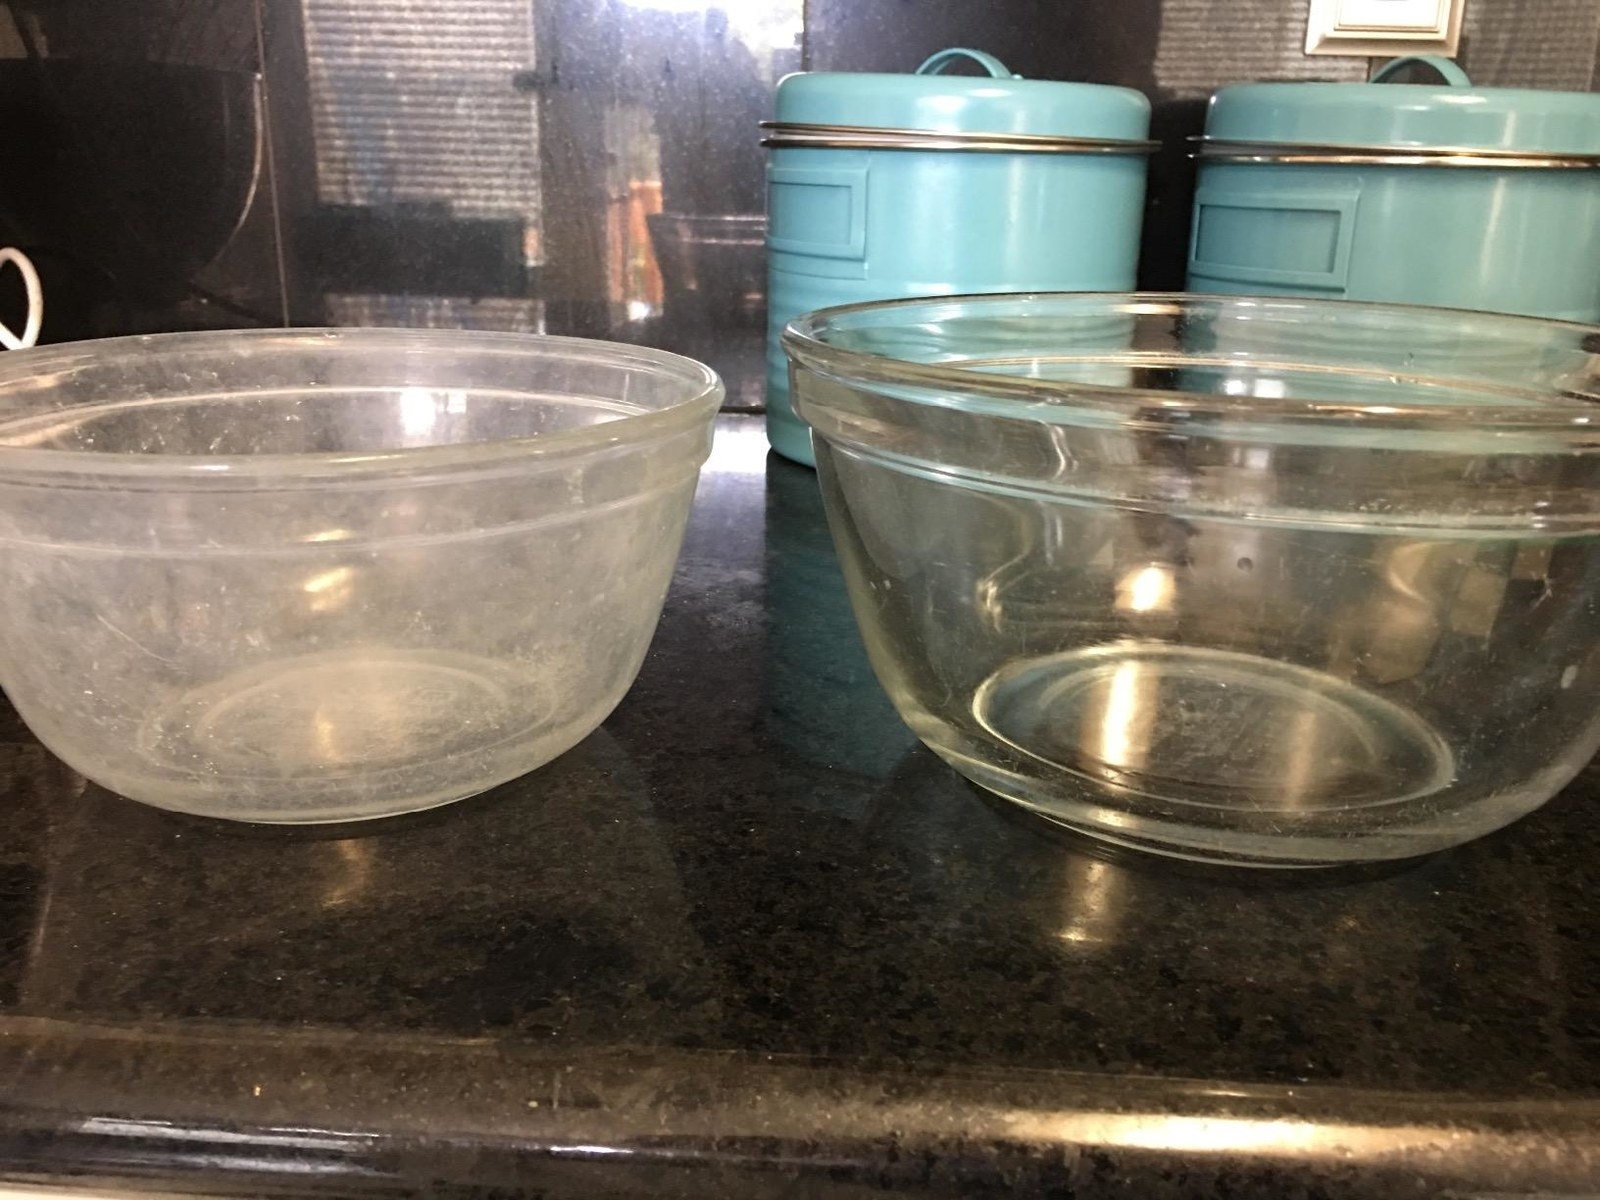 Two glass mixing bowls: One cloudy and white because it was washed in hard water; the other perfectly clear because it was washed with the booster